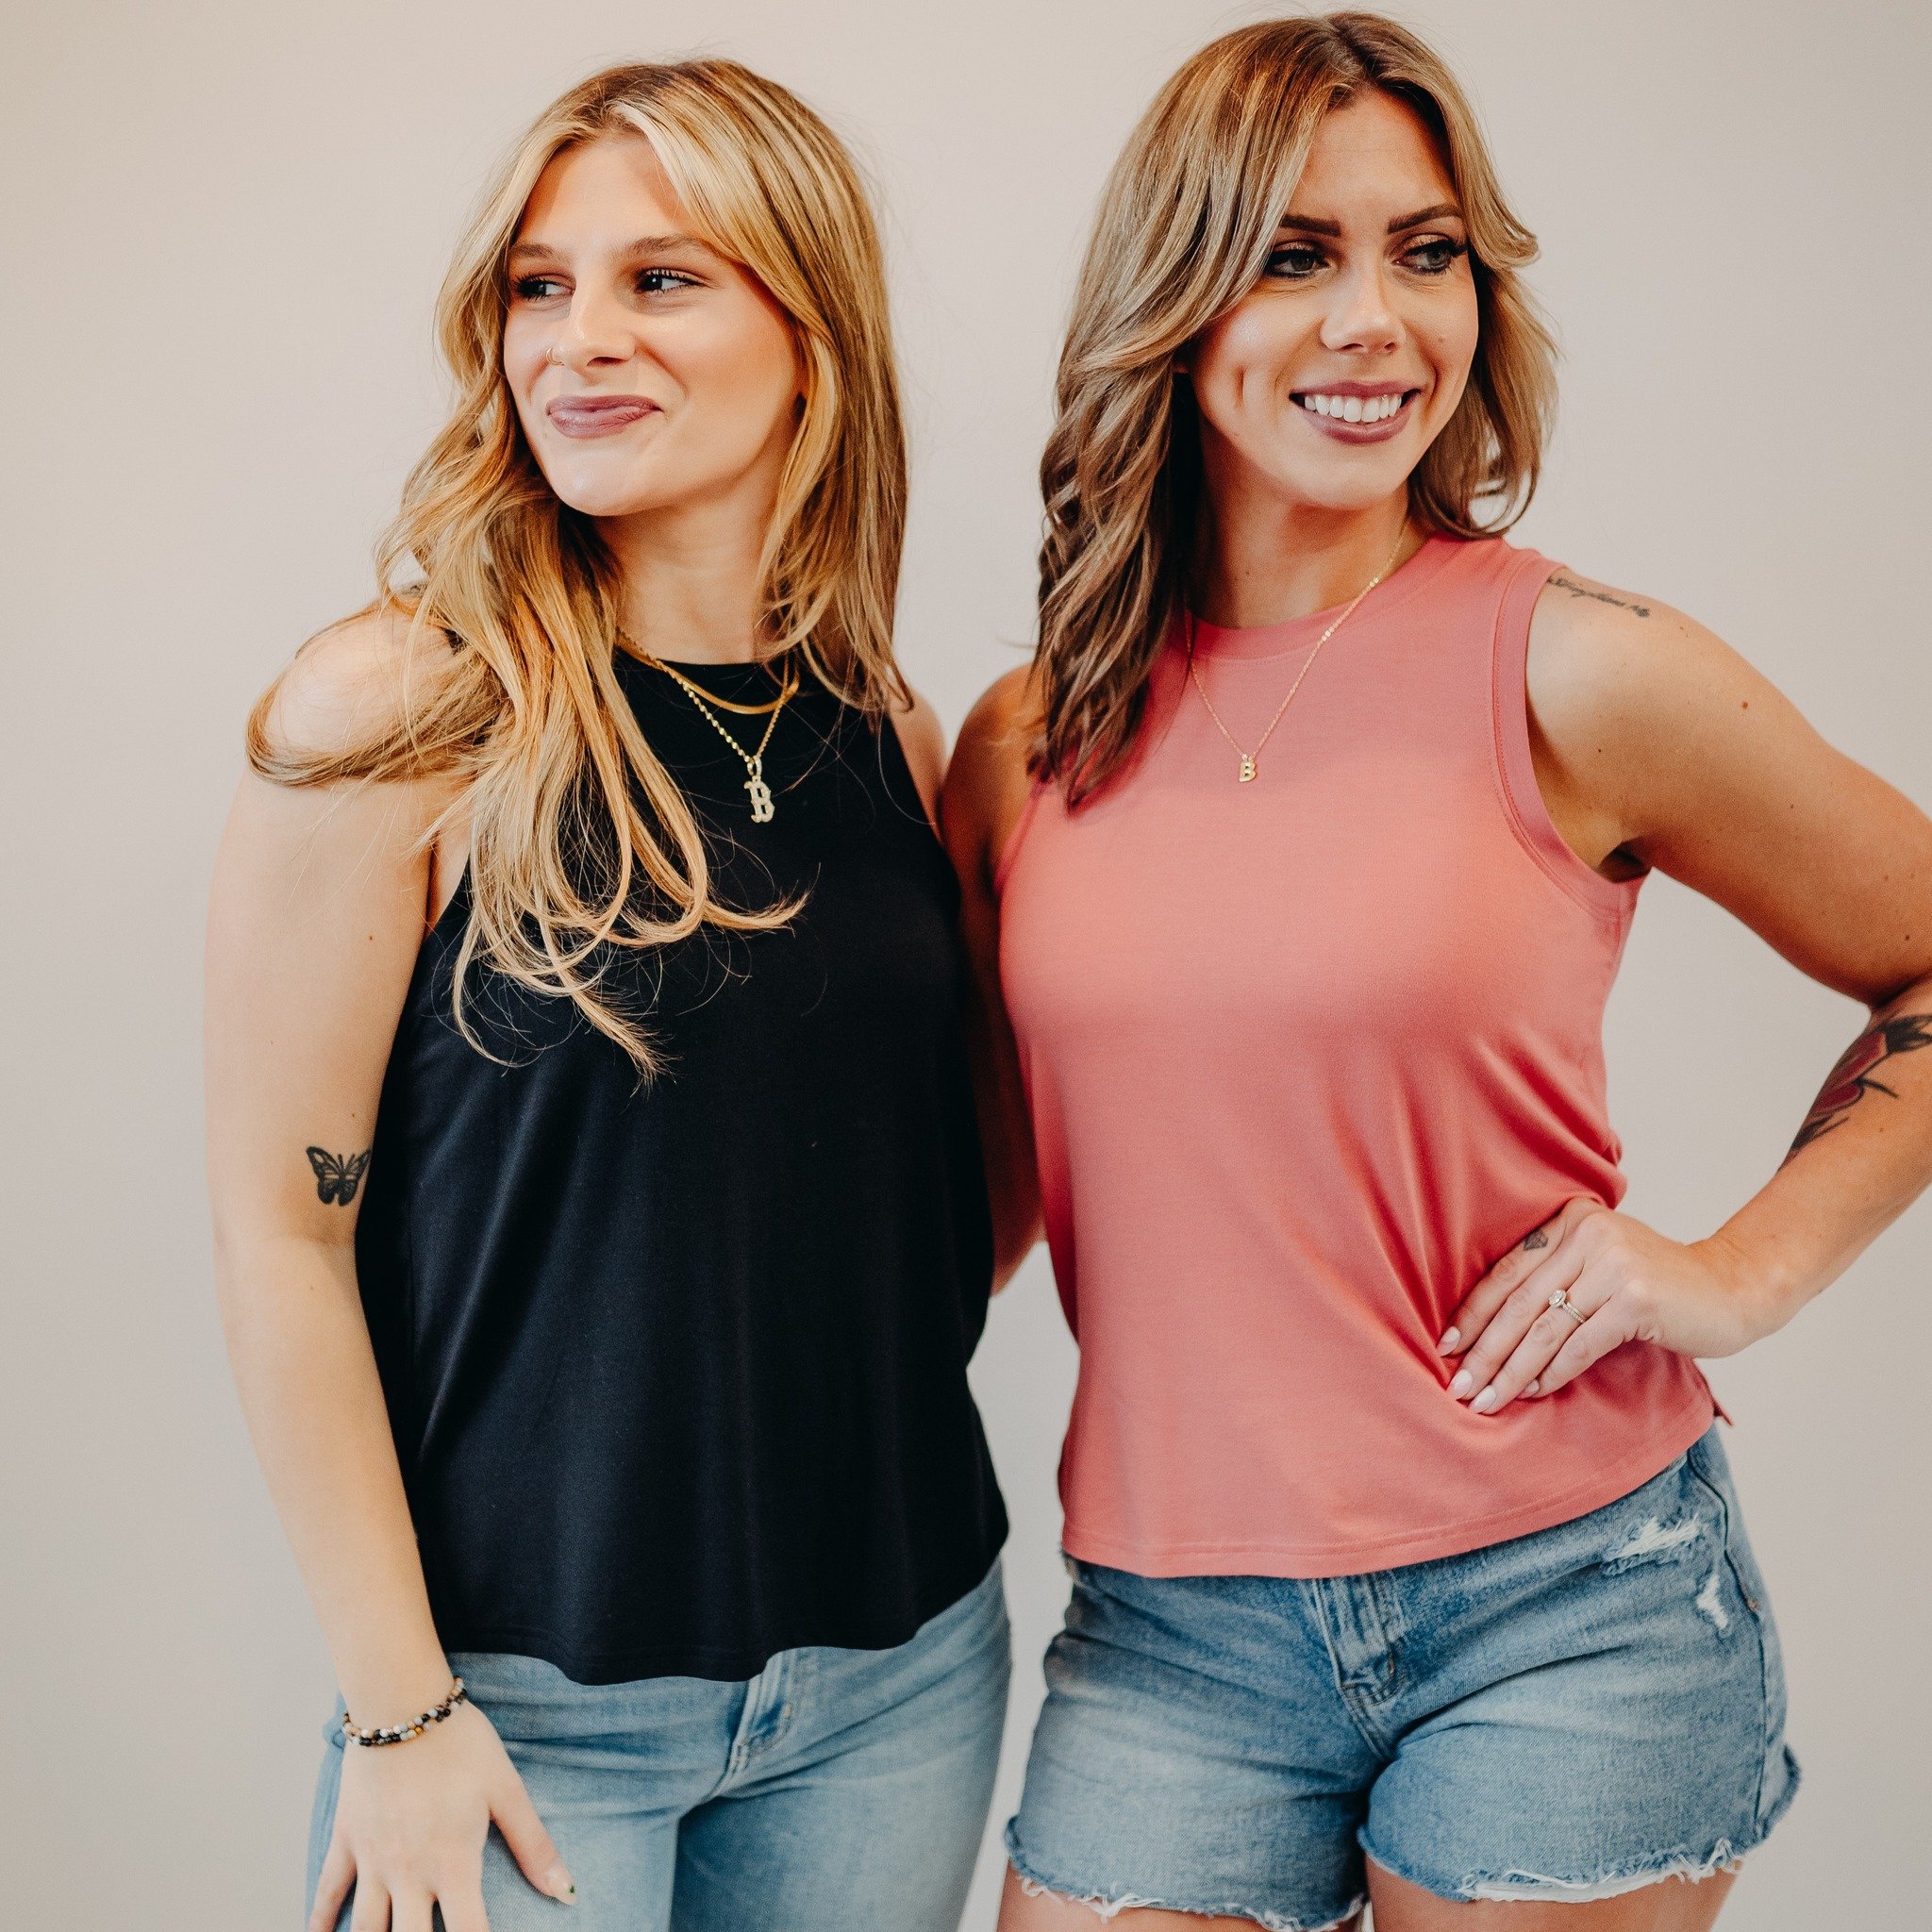 Camis, tanks, + tees, oh my! 🌻

Just in case you missed it, we just launched a TON of new basics to our online collection! Be sure to go check it out + grab your favorites for springtime! 🛍️